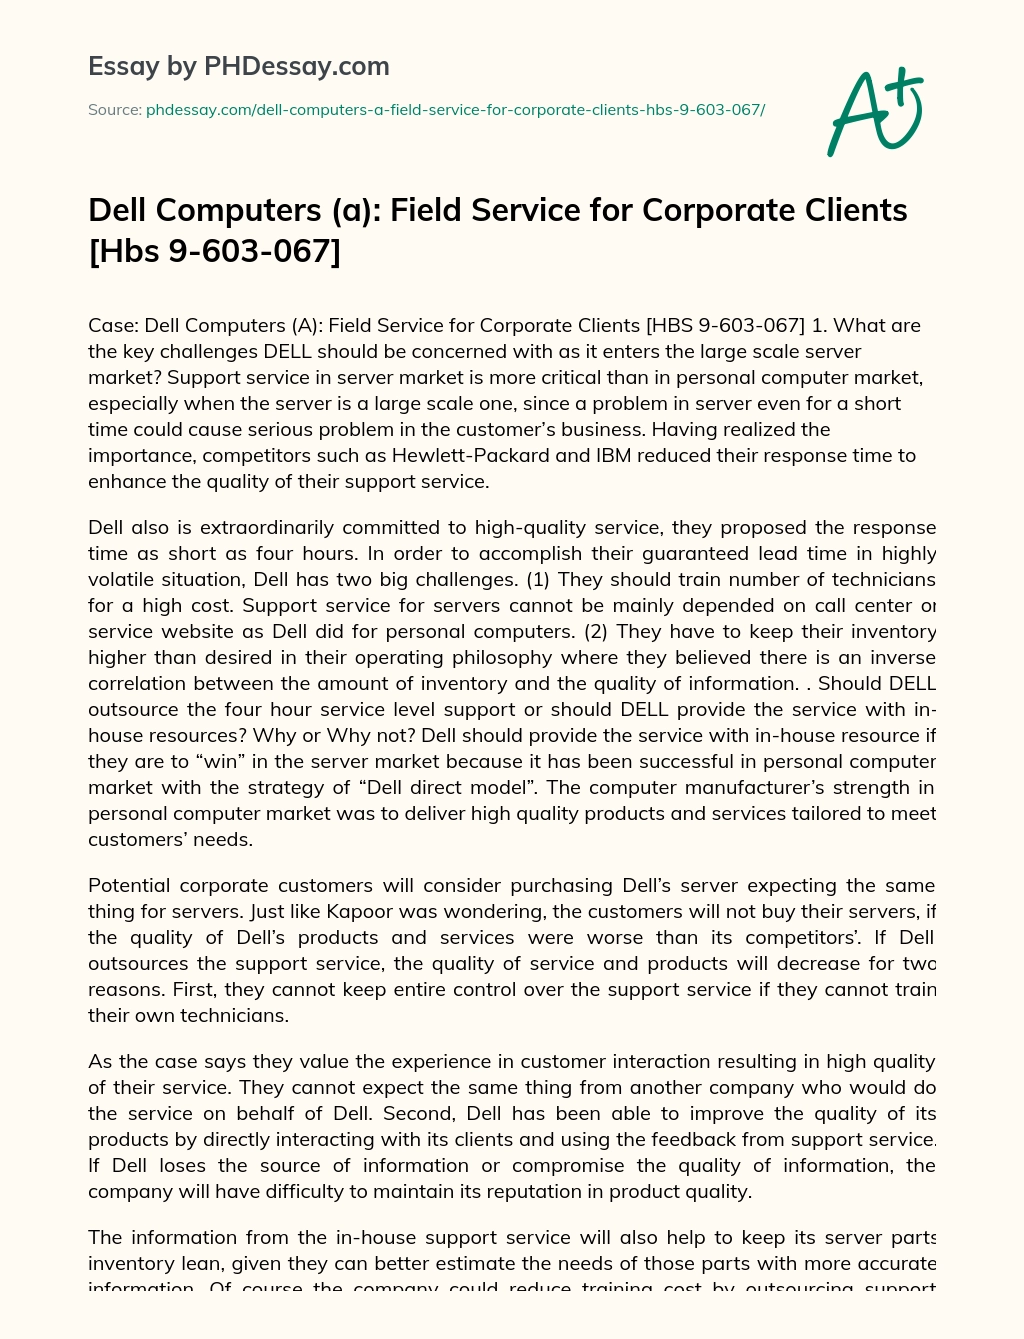 Dell Computers (a): Field Service for Corporate Clients [Hbs 9-603-067] essay